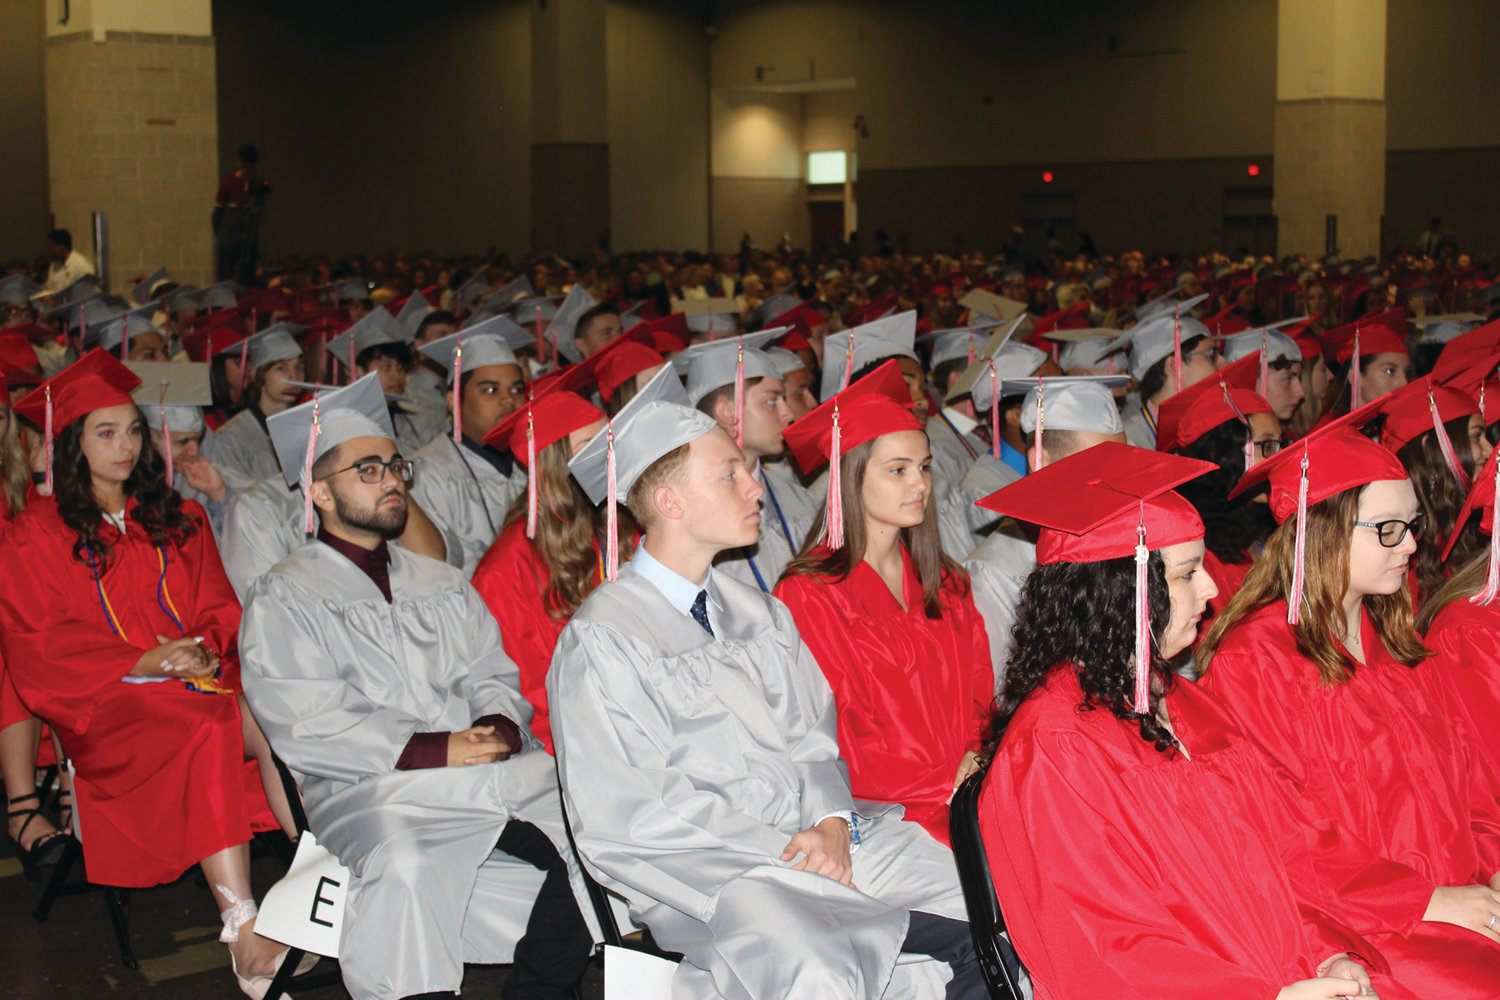 A SEA OF RED AND GRAY: The graduates filled the venue with their cap and gown colors on Saturday as they awaited their moment to cross the stage.